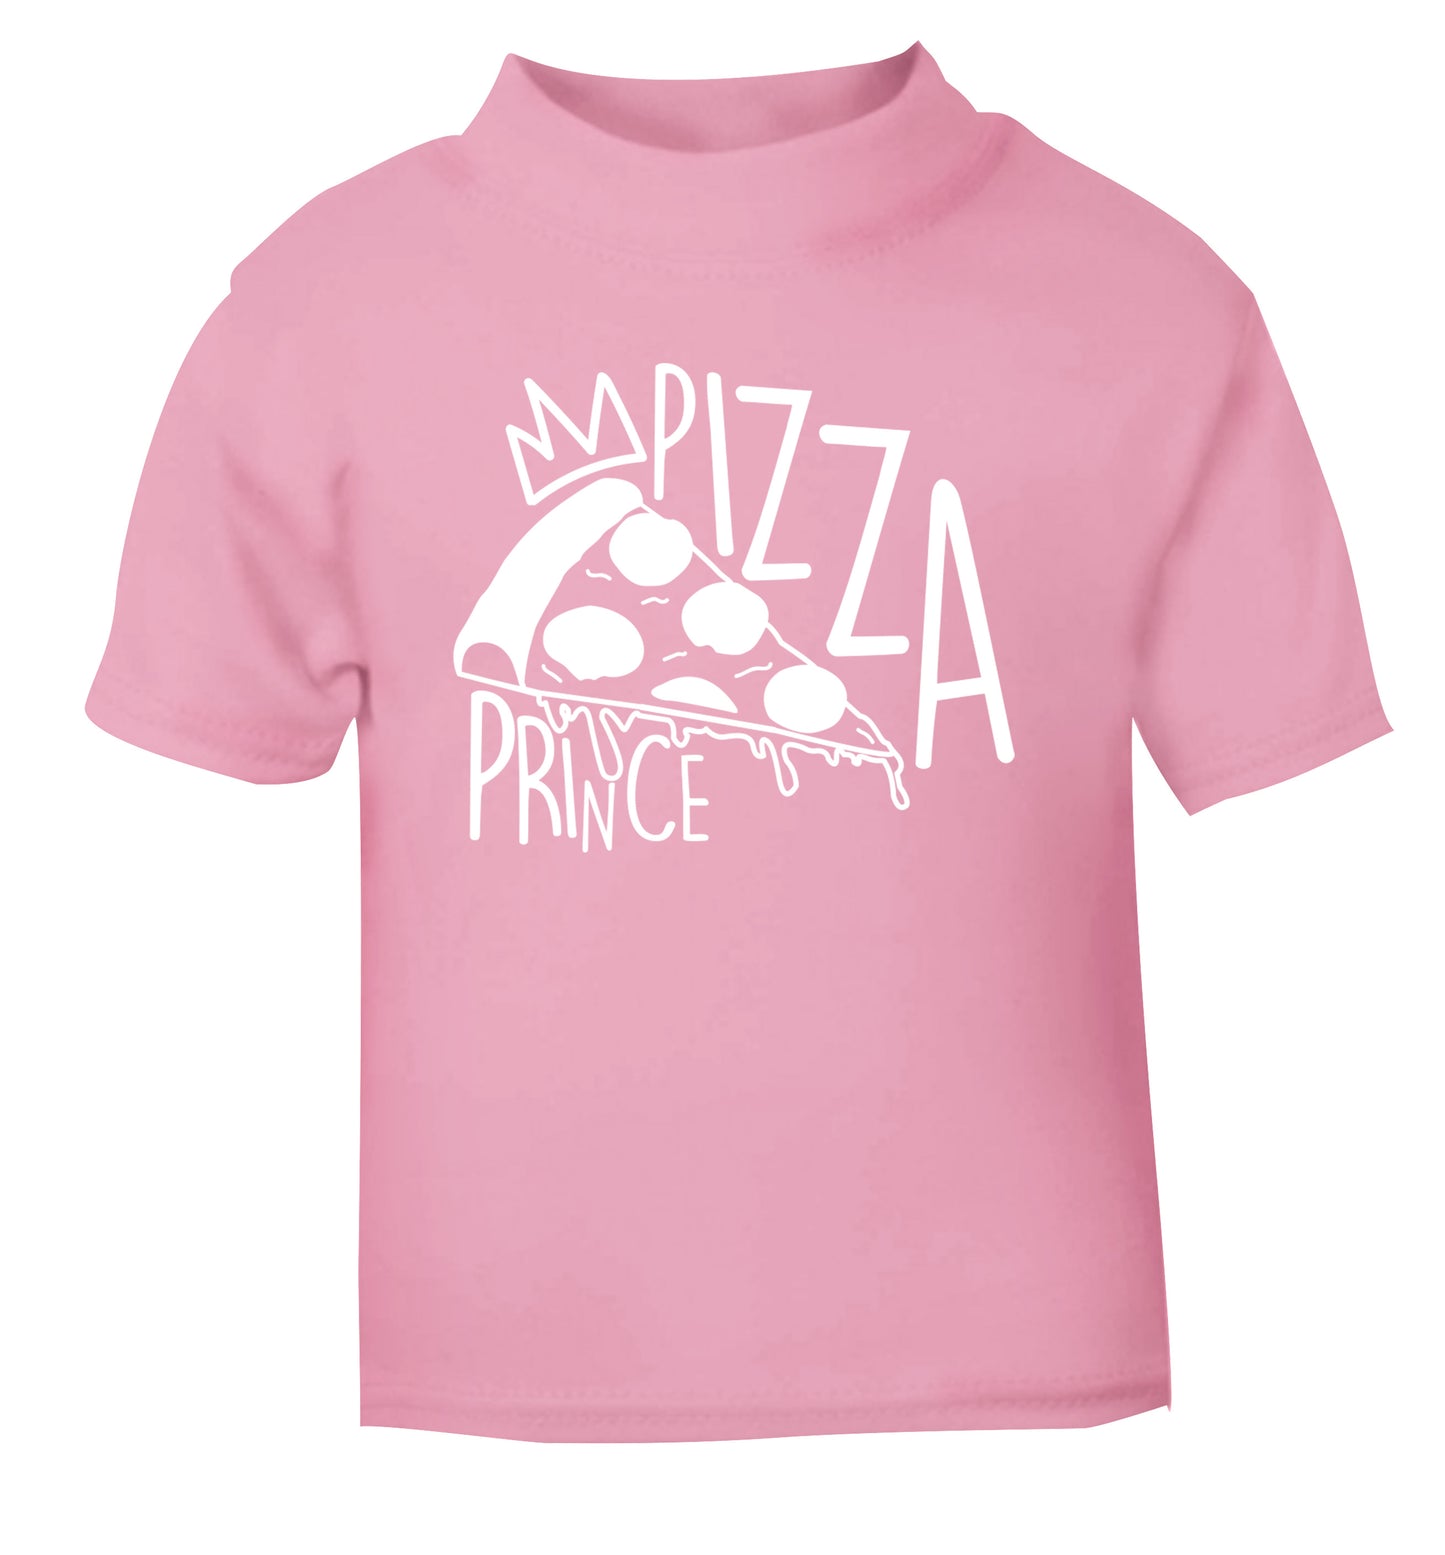 Pizza Prince light pink Baby Toddler Tshirt 2 Years